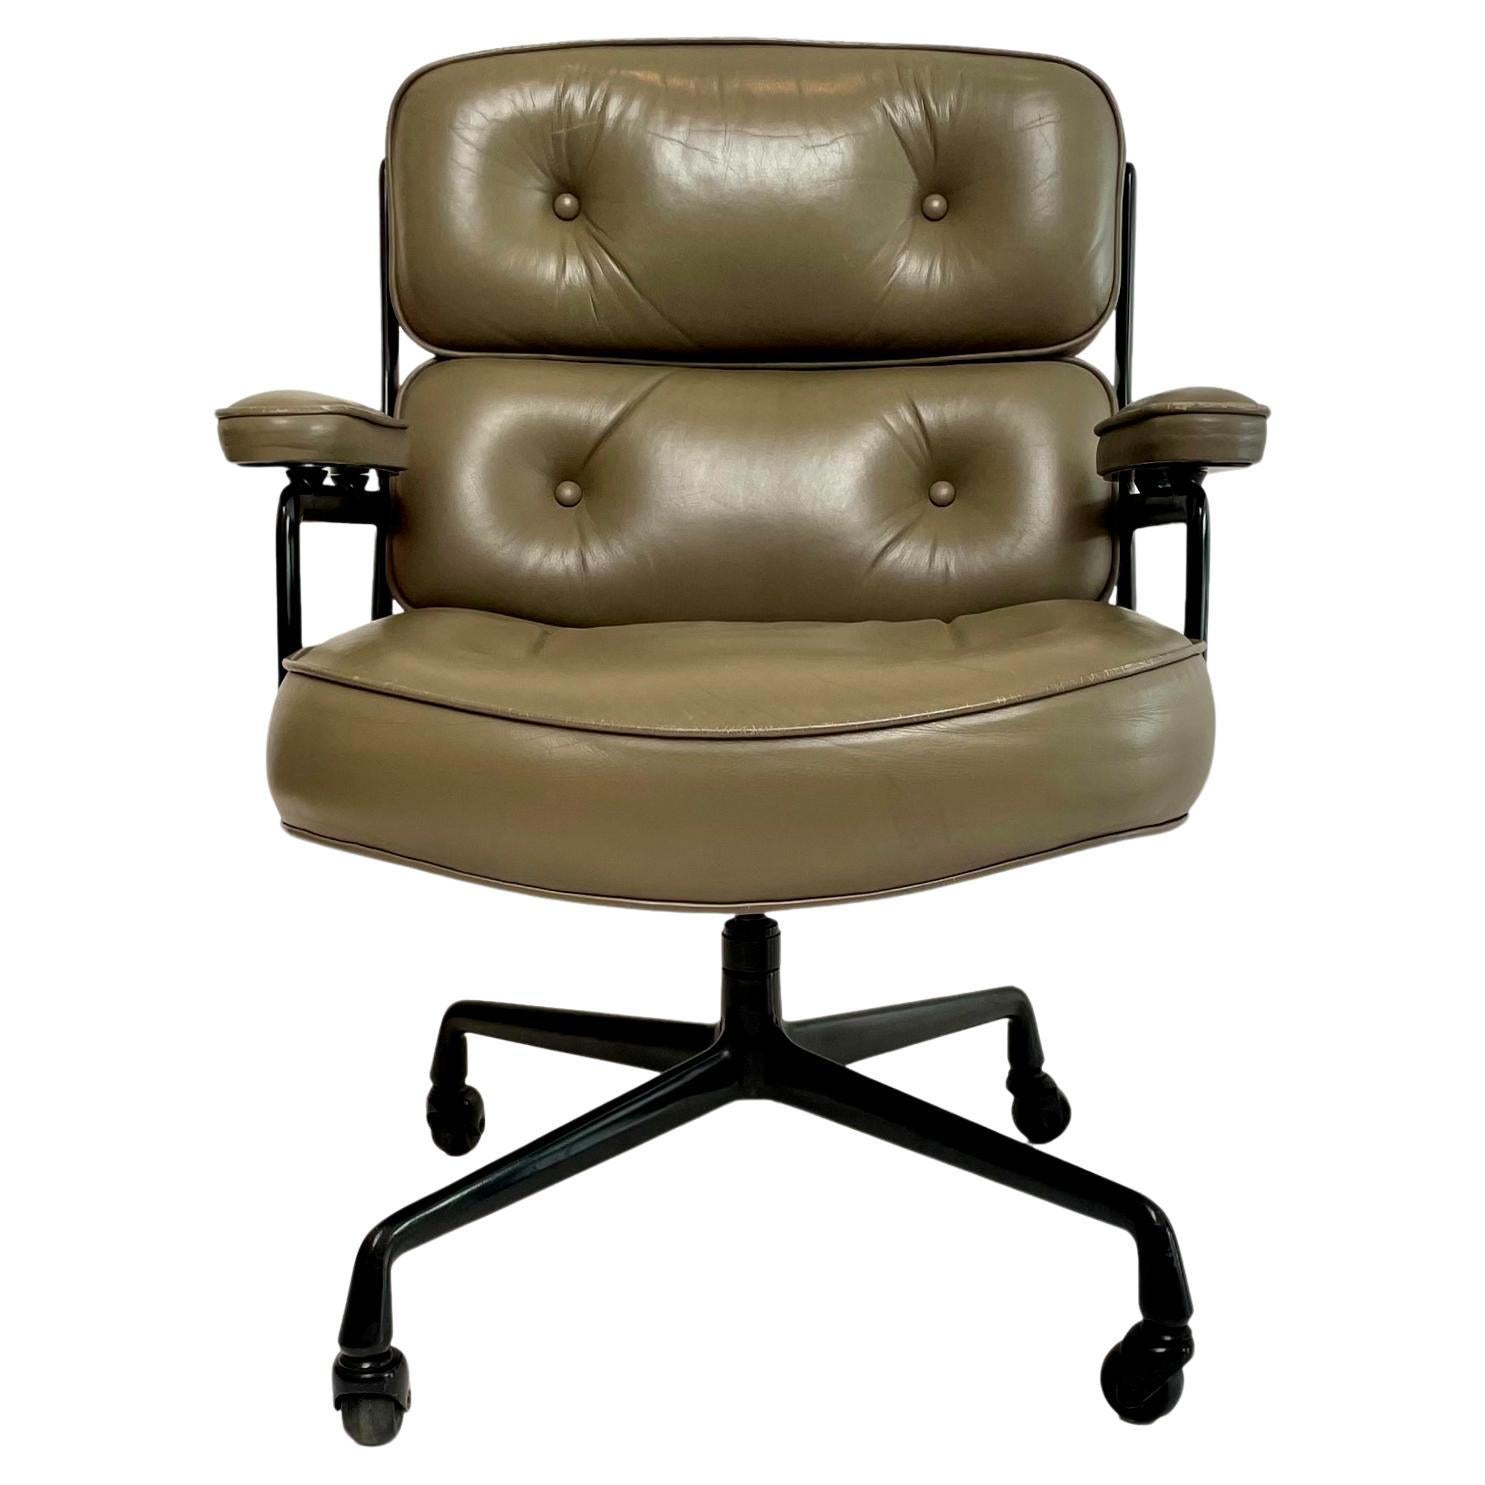 Eames Time Life Chair in Olive Leather for Herman Miller, c. 1984 USA